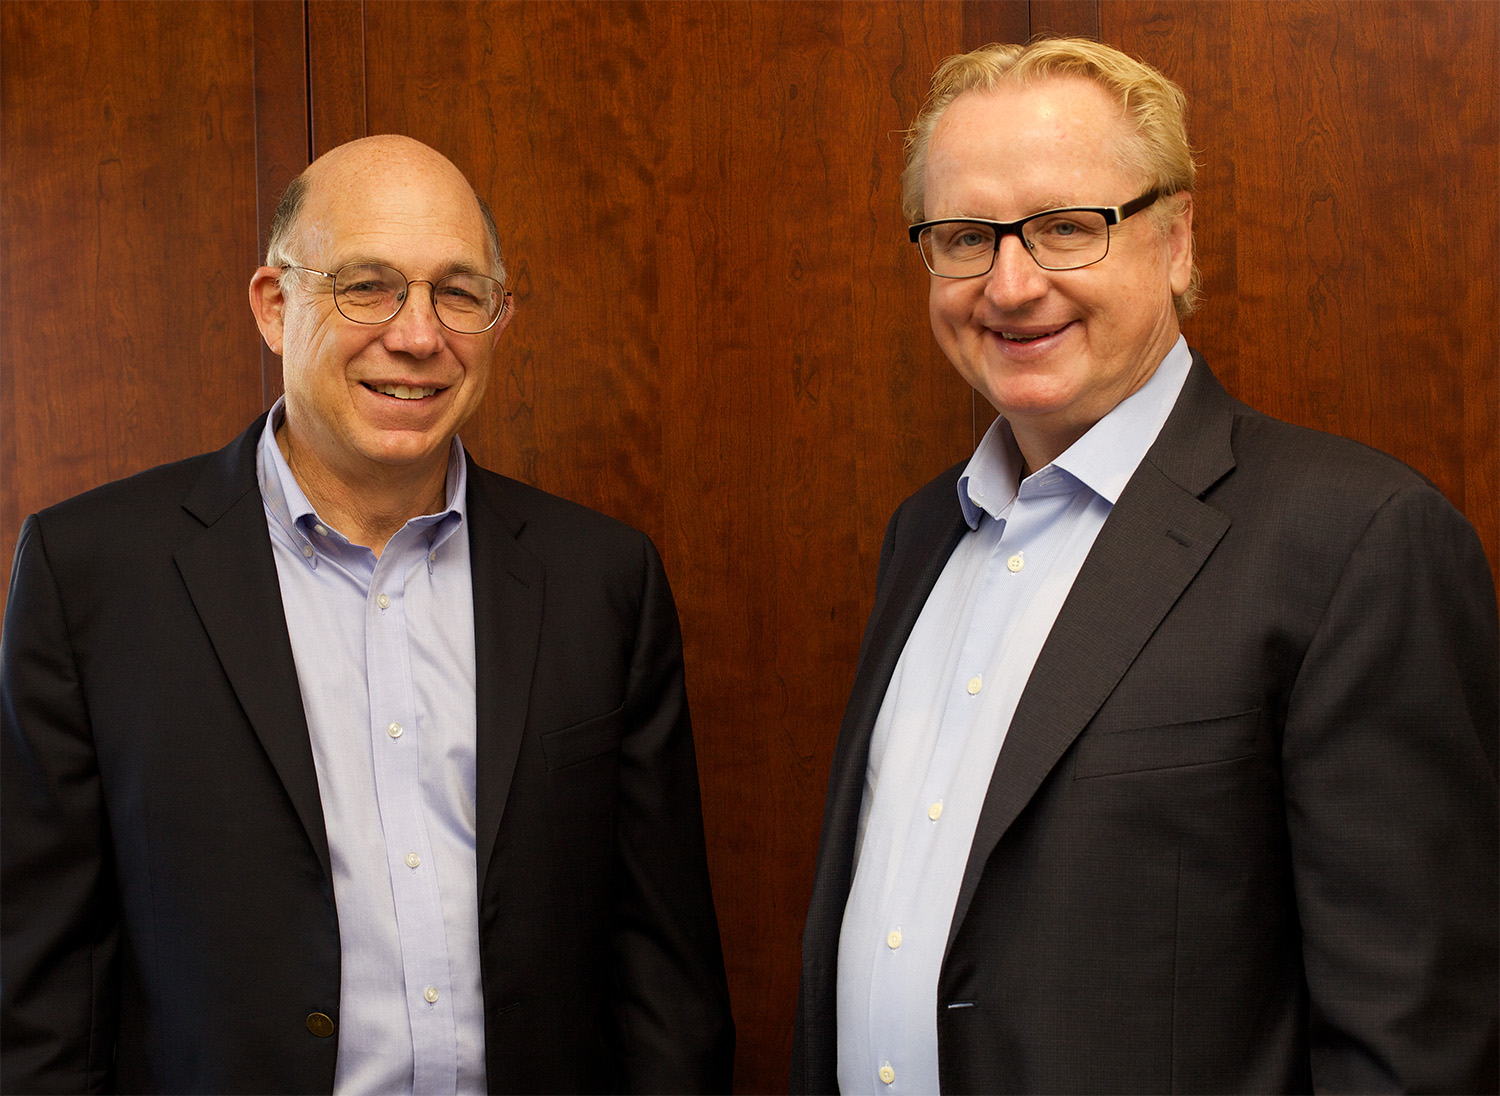 The Scripps Research Institute will be led by Peter G. Schultz (left) as CEO and Steve A. Kay as president. (Photo by John Dole.)